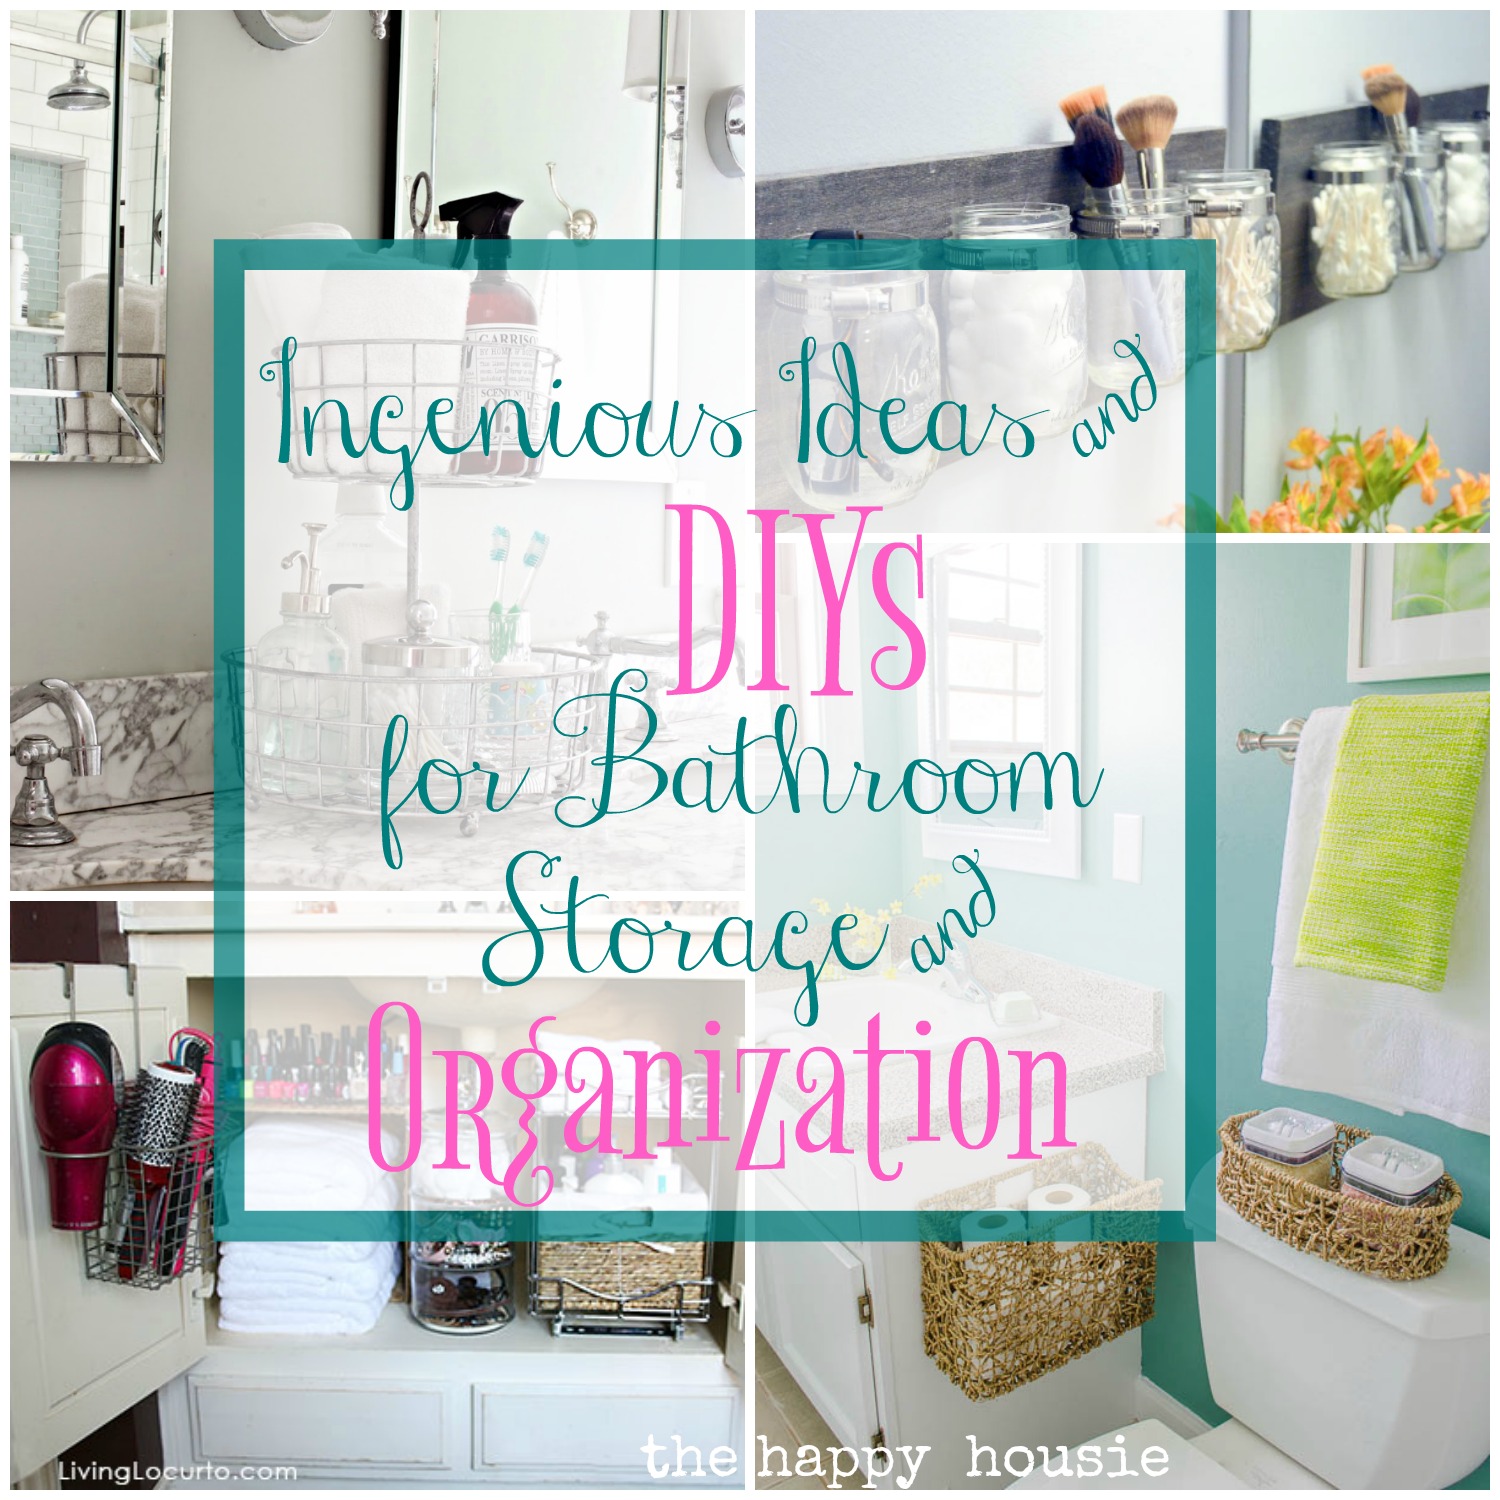 https://www.thehappyhousie.com/wp-content/uploads/2017/02/You-wont-believe-these-amazingly-ingenious-ideas-and-DIYs-for-bathroom-storage-and-organization-hacks-.jpg